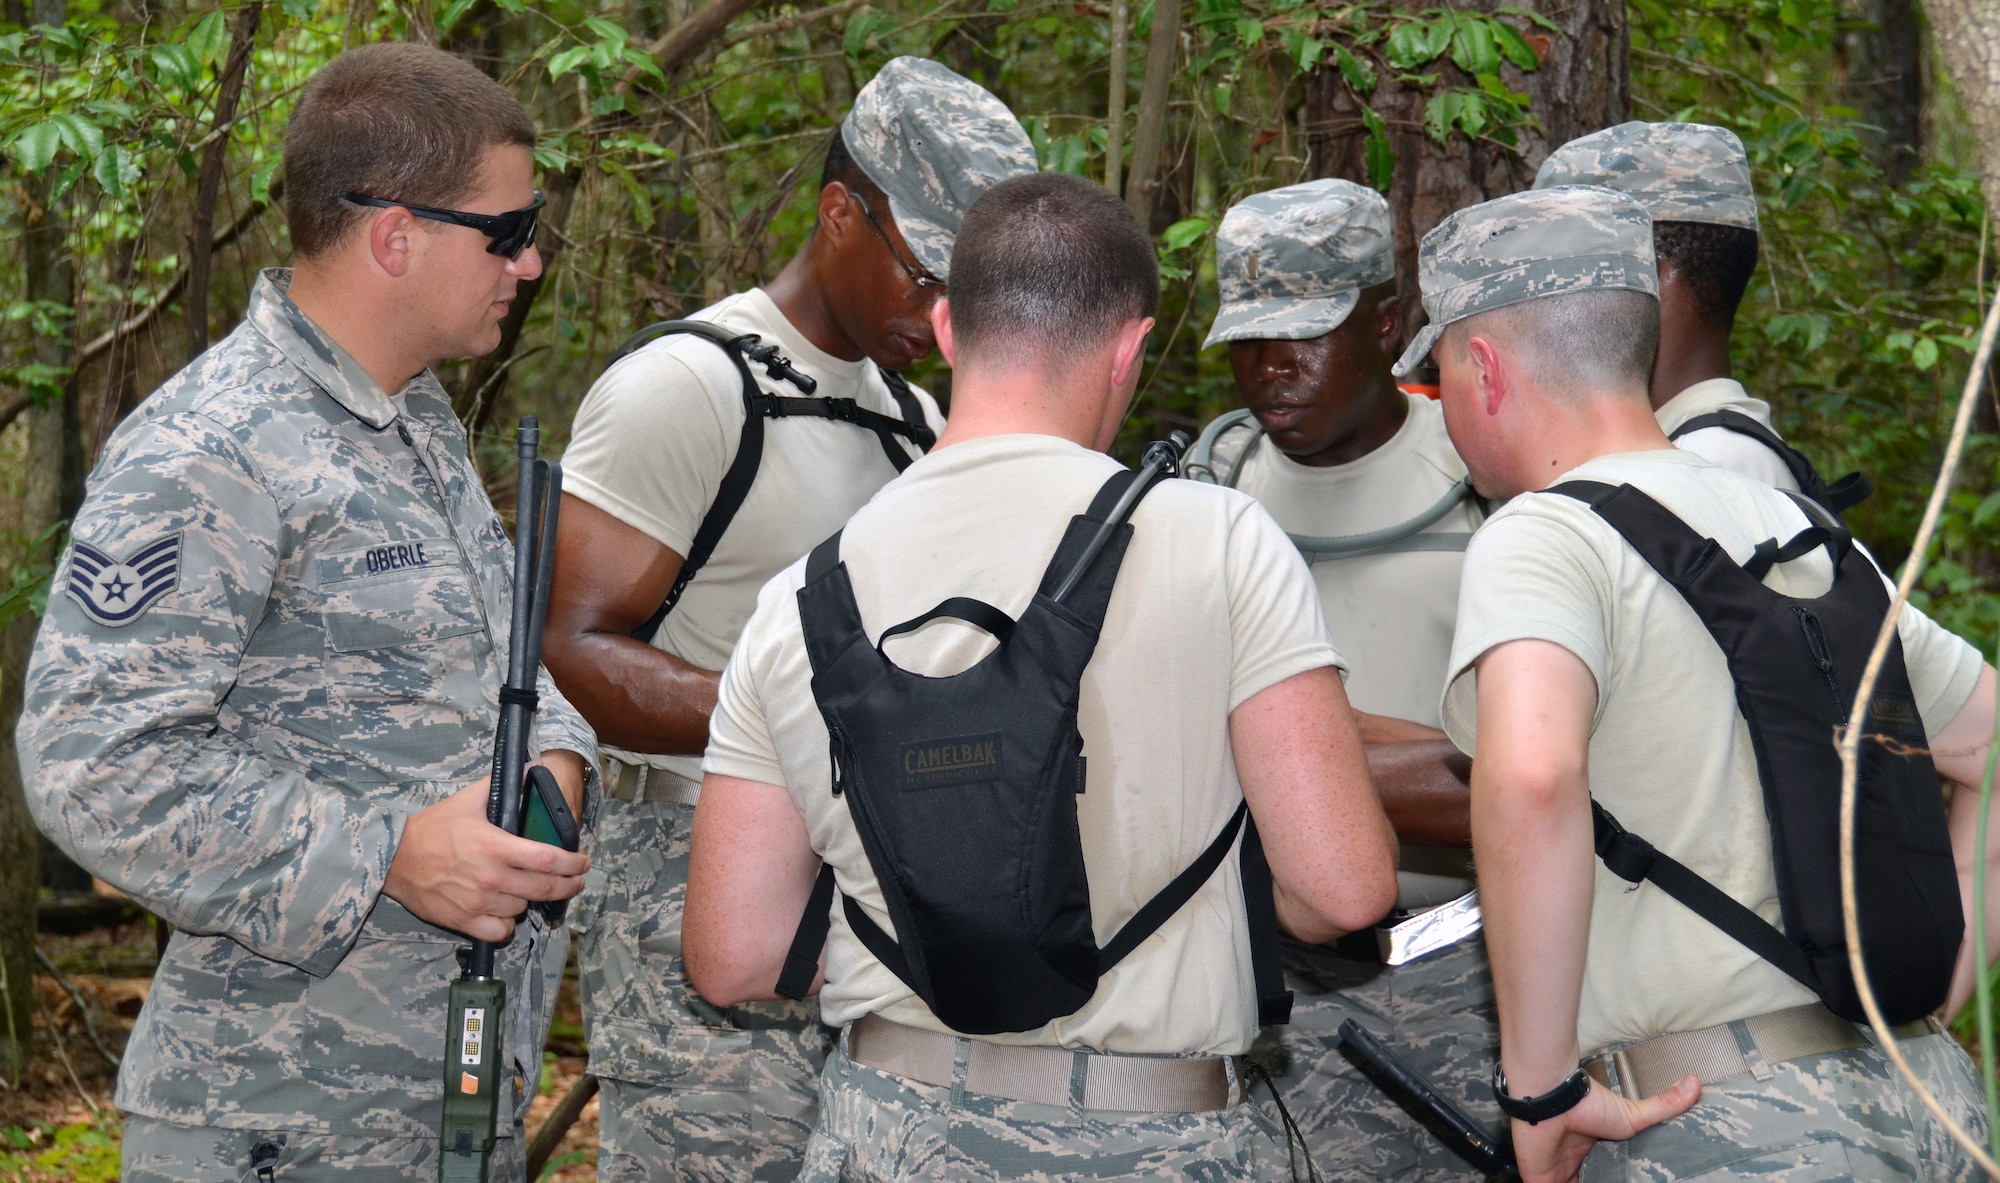 Staff Sgt. Robert Oberle, 5th Comabat Communications Squadron Support, observes his group of five chaplain candidates as they use their land navigation training to plot points onto a map to get to their specified location at Robins Air Force Base, Ga, July 25. The candidates are participants in the Air Force Reserve Command Chaplain Candidate Intensive Interview program which aims to provide an extensive overview of what the Air Force Reserve mission is as well as a broad overview of the military chaplain corps.(U.S. Air Force photo/Tech. Sgt. Kelly Goonan)